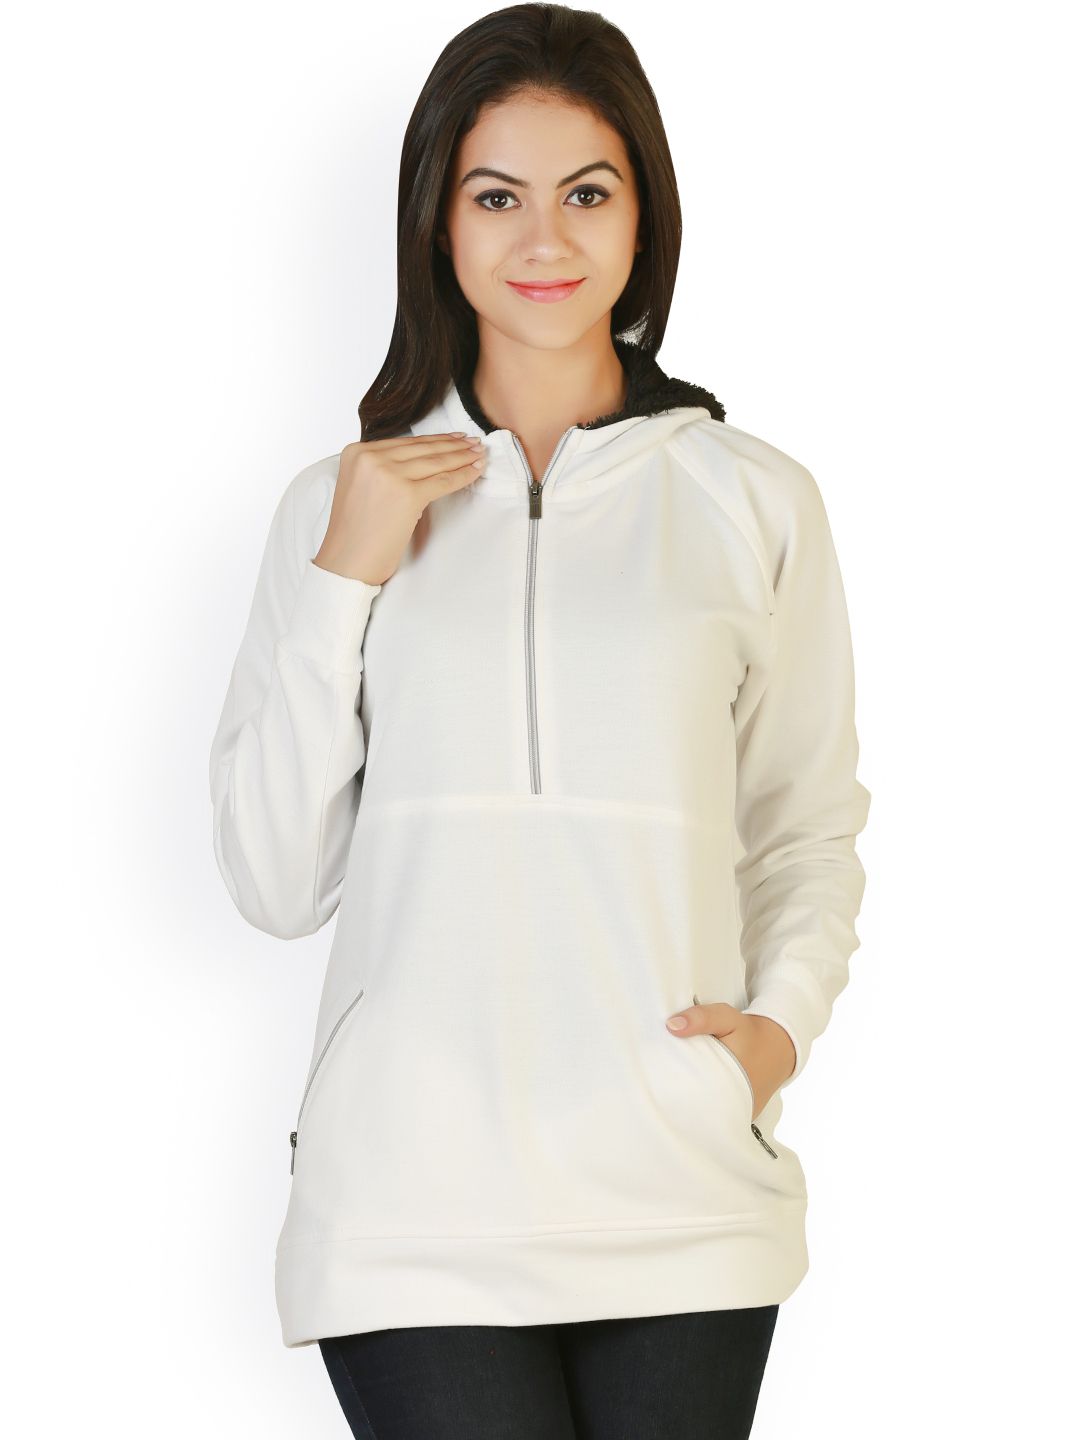 Belle Fille White Hooded Sweatshirt Price in India